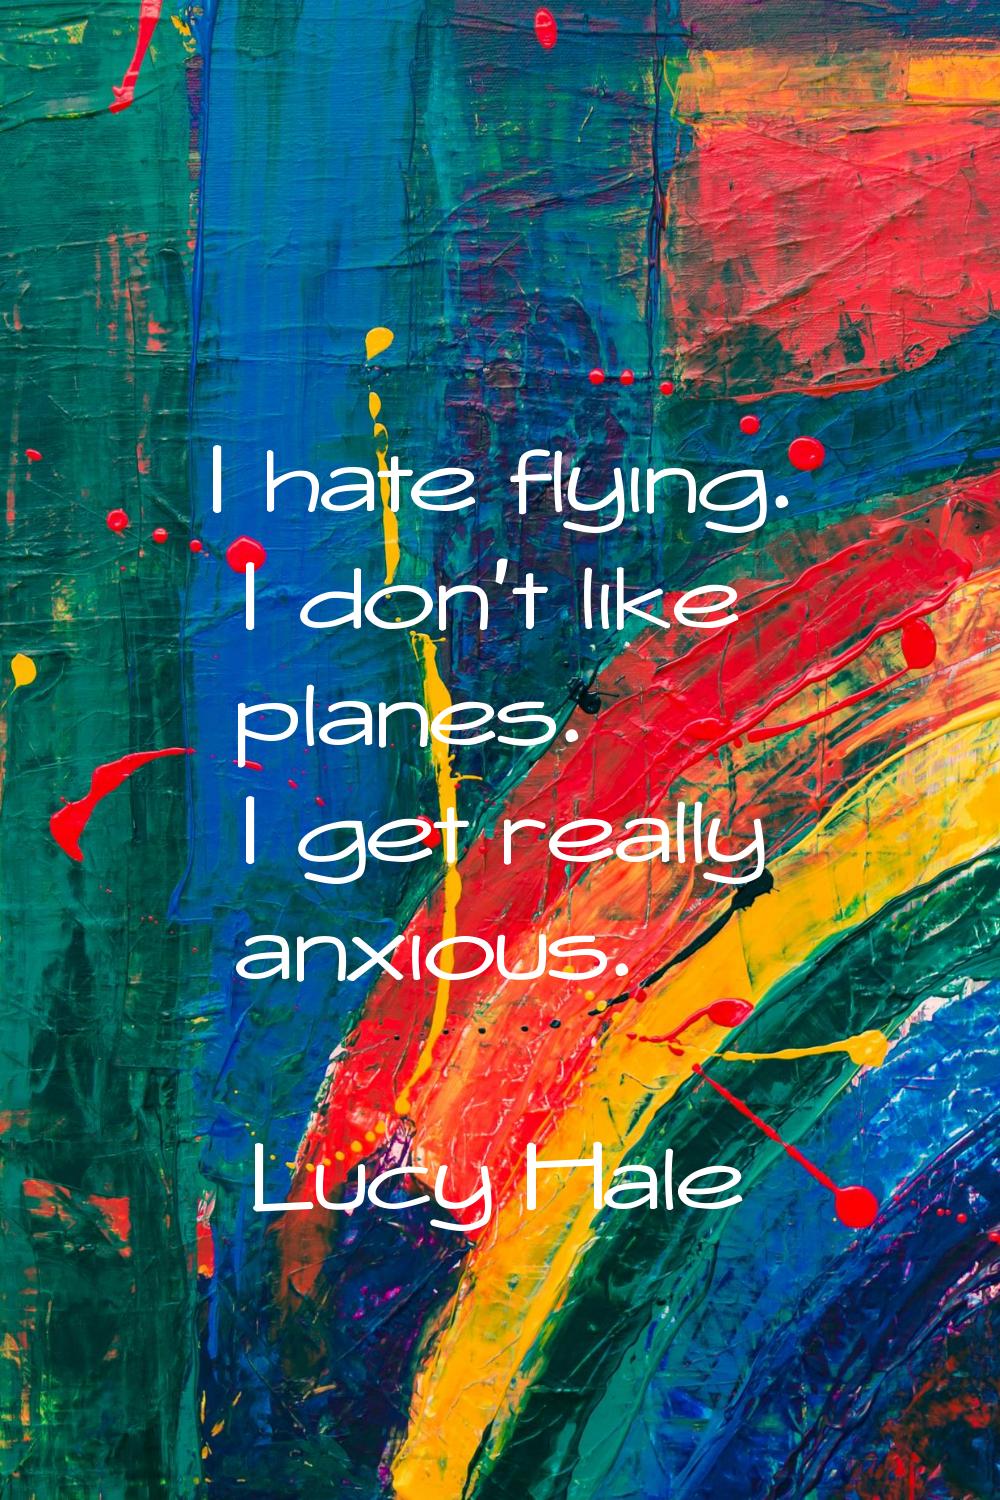 I hate flying. I don't like planes. I get really anxious.